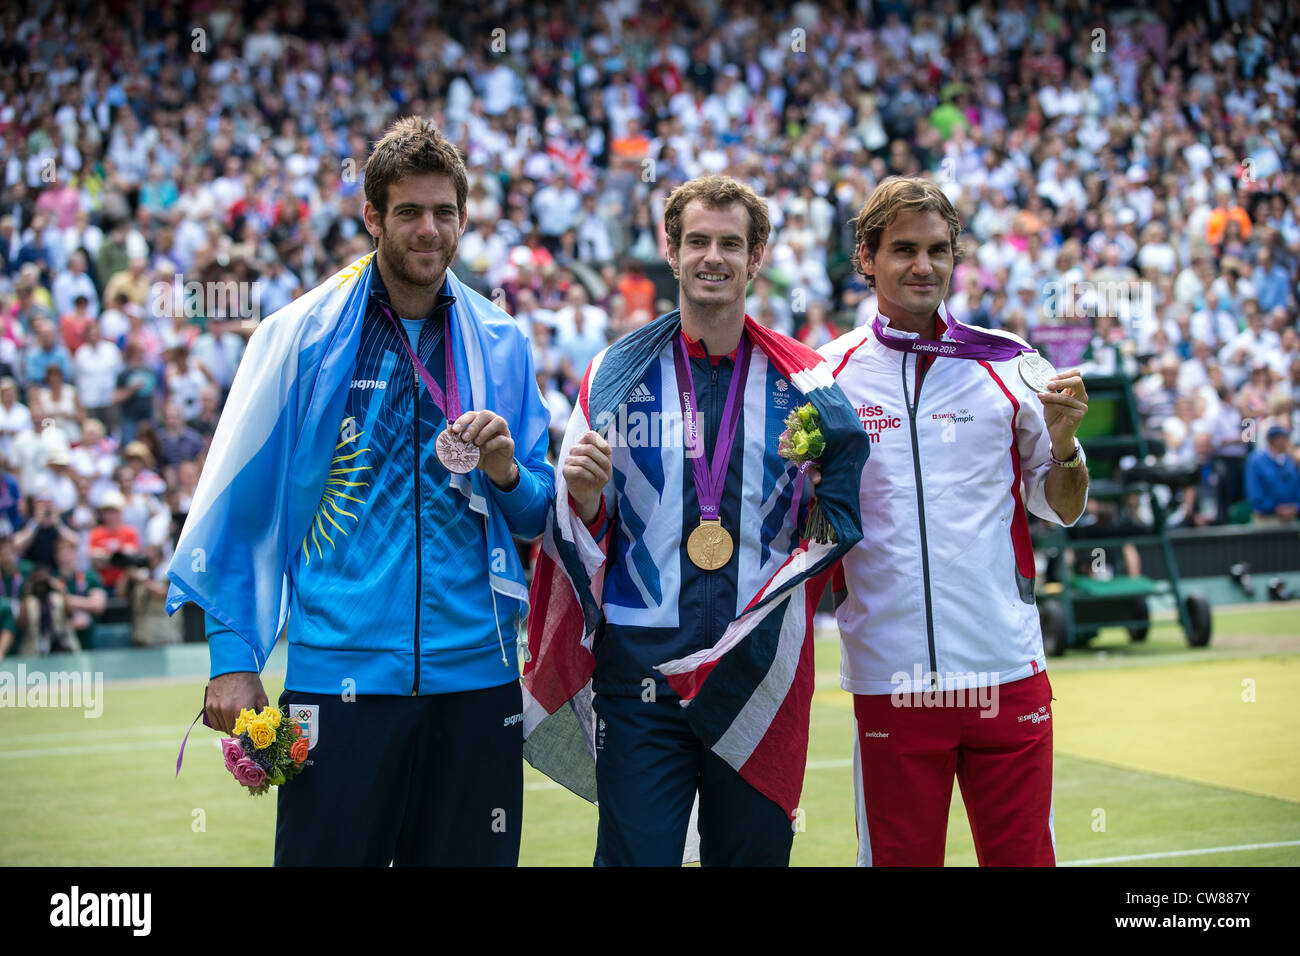 Andy Murray (GBR) wins the gold medal in the Men's Tennis Final at the Olympic Summer Games, London 2012 Stock Photo